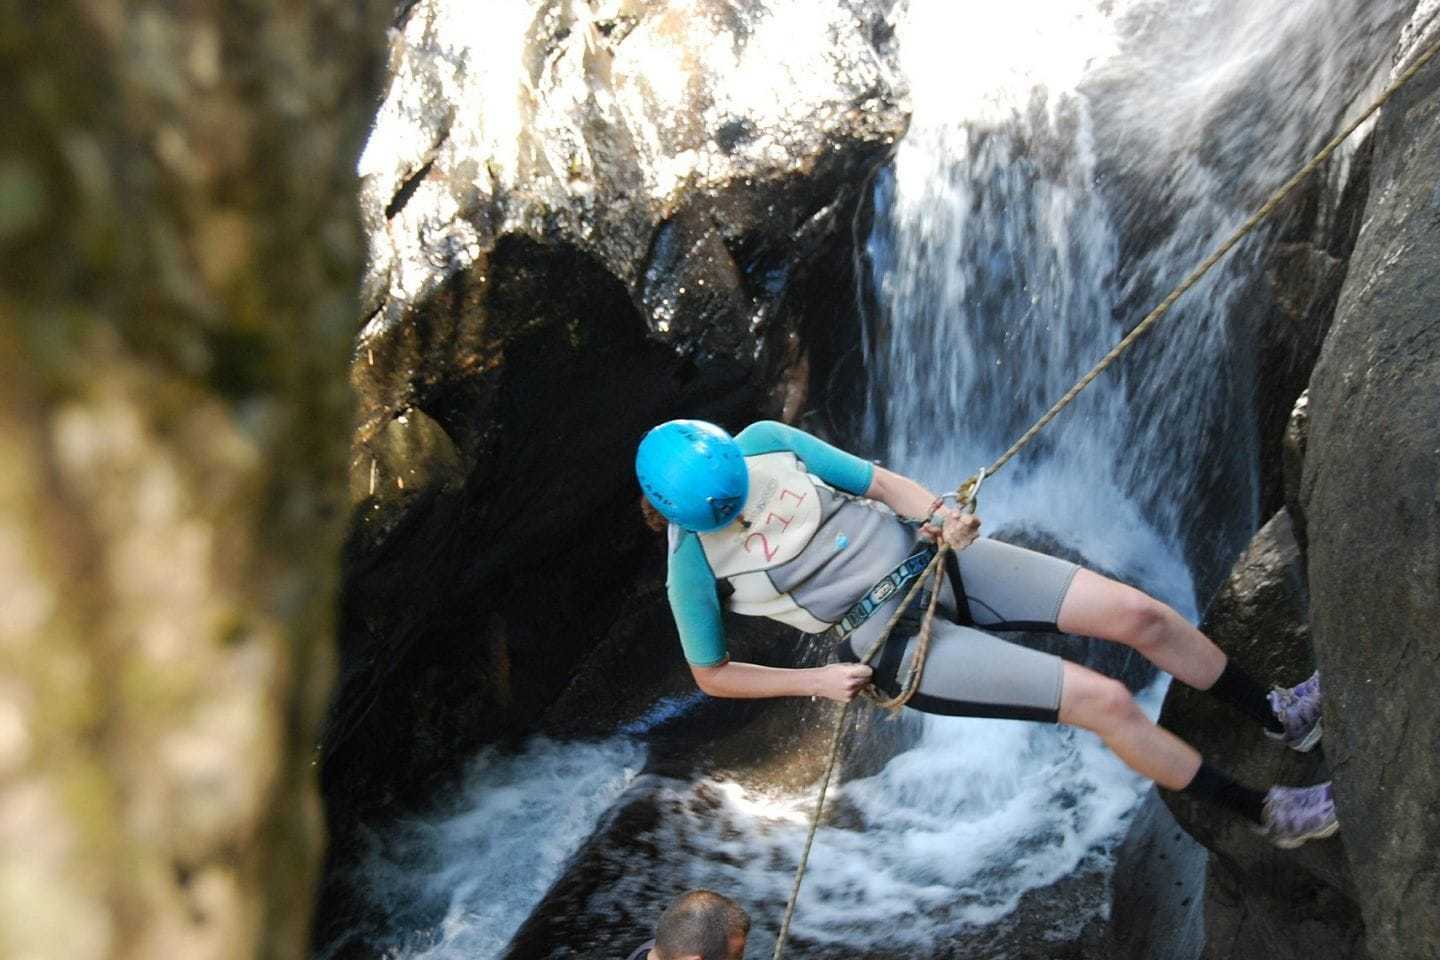 woman canyoning down a waterfall